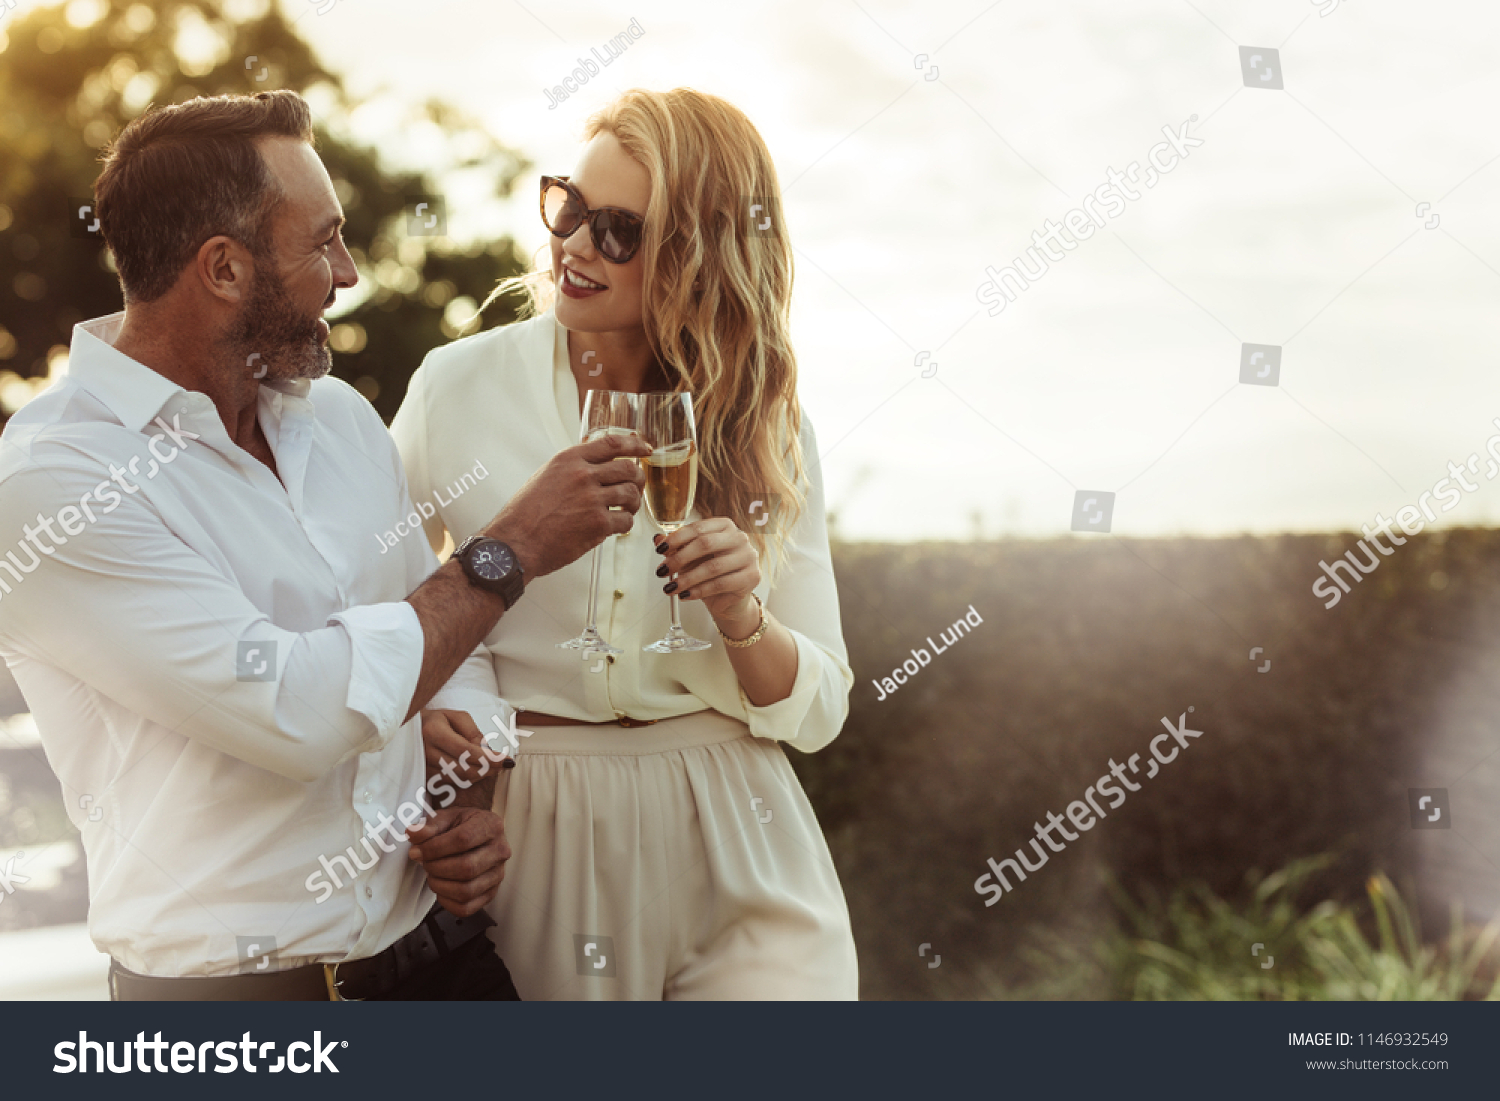 Romantic couple toasting wine glasses outdoors. Beautiful woman clinking wine glass with her boyfriend. #1146932549